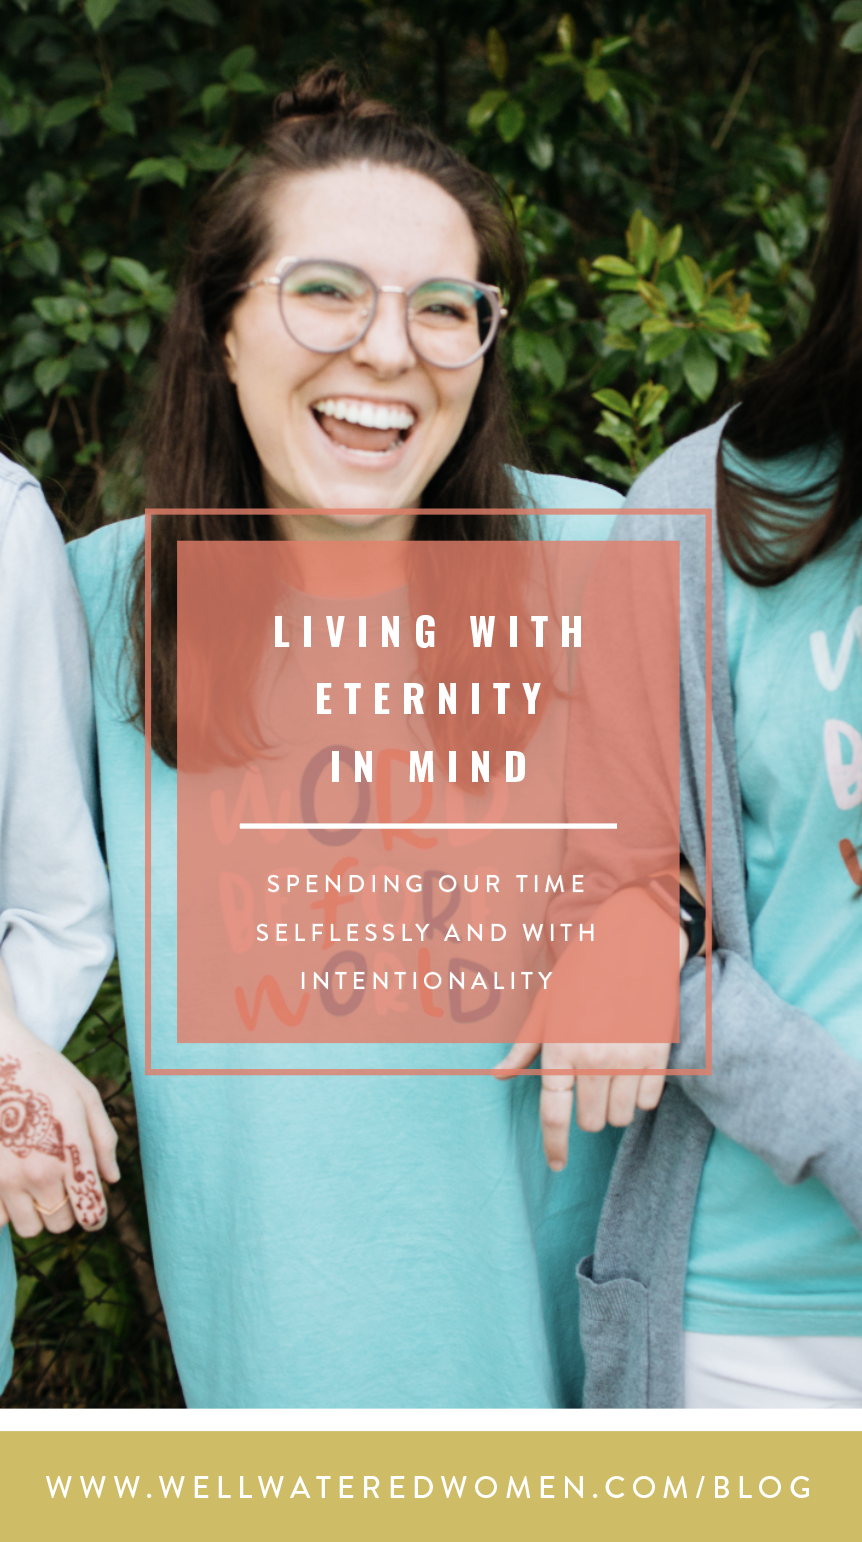 Well-Watered Women Blog: Living With Eternity in Mind